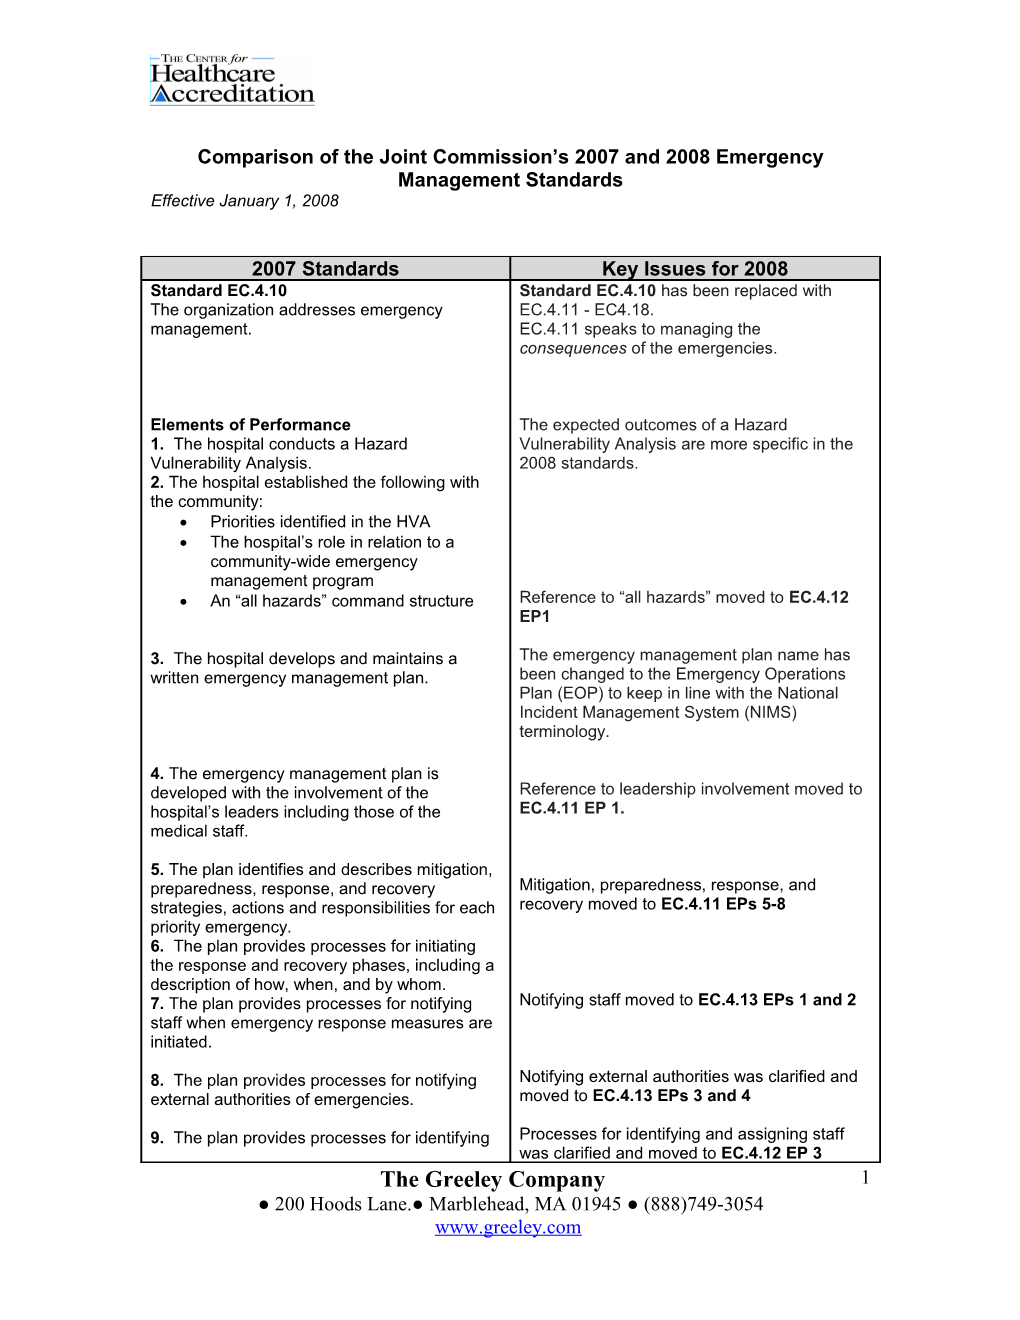 Comparison of the Joint Commission S 2007 and 2008 Emergency Management Standards